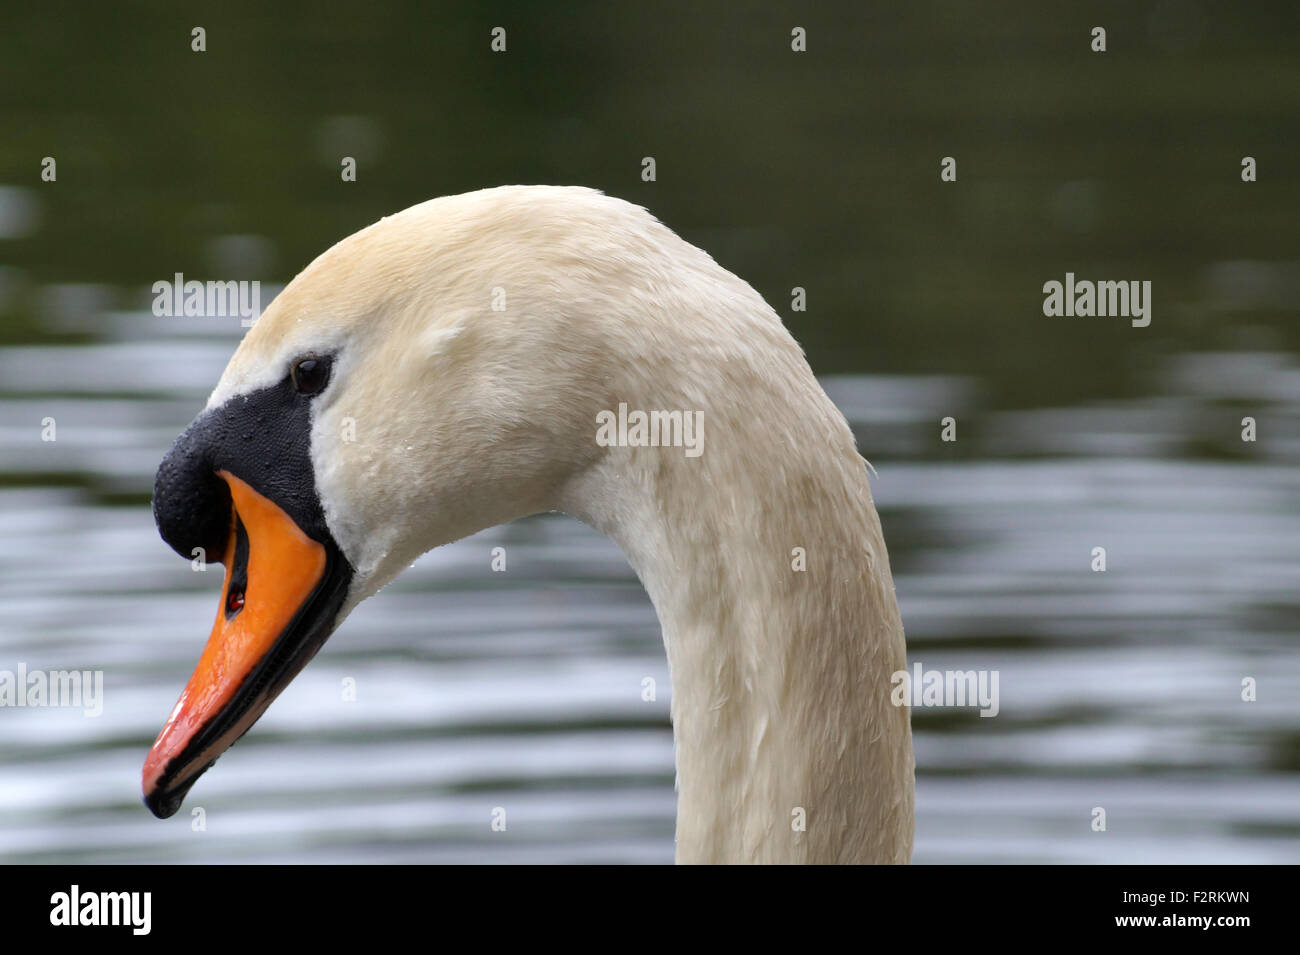 Mute Swan in a Pond, Side View Profile with beautiful orange bill appears to be looking at the camera Stock Photo